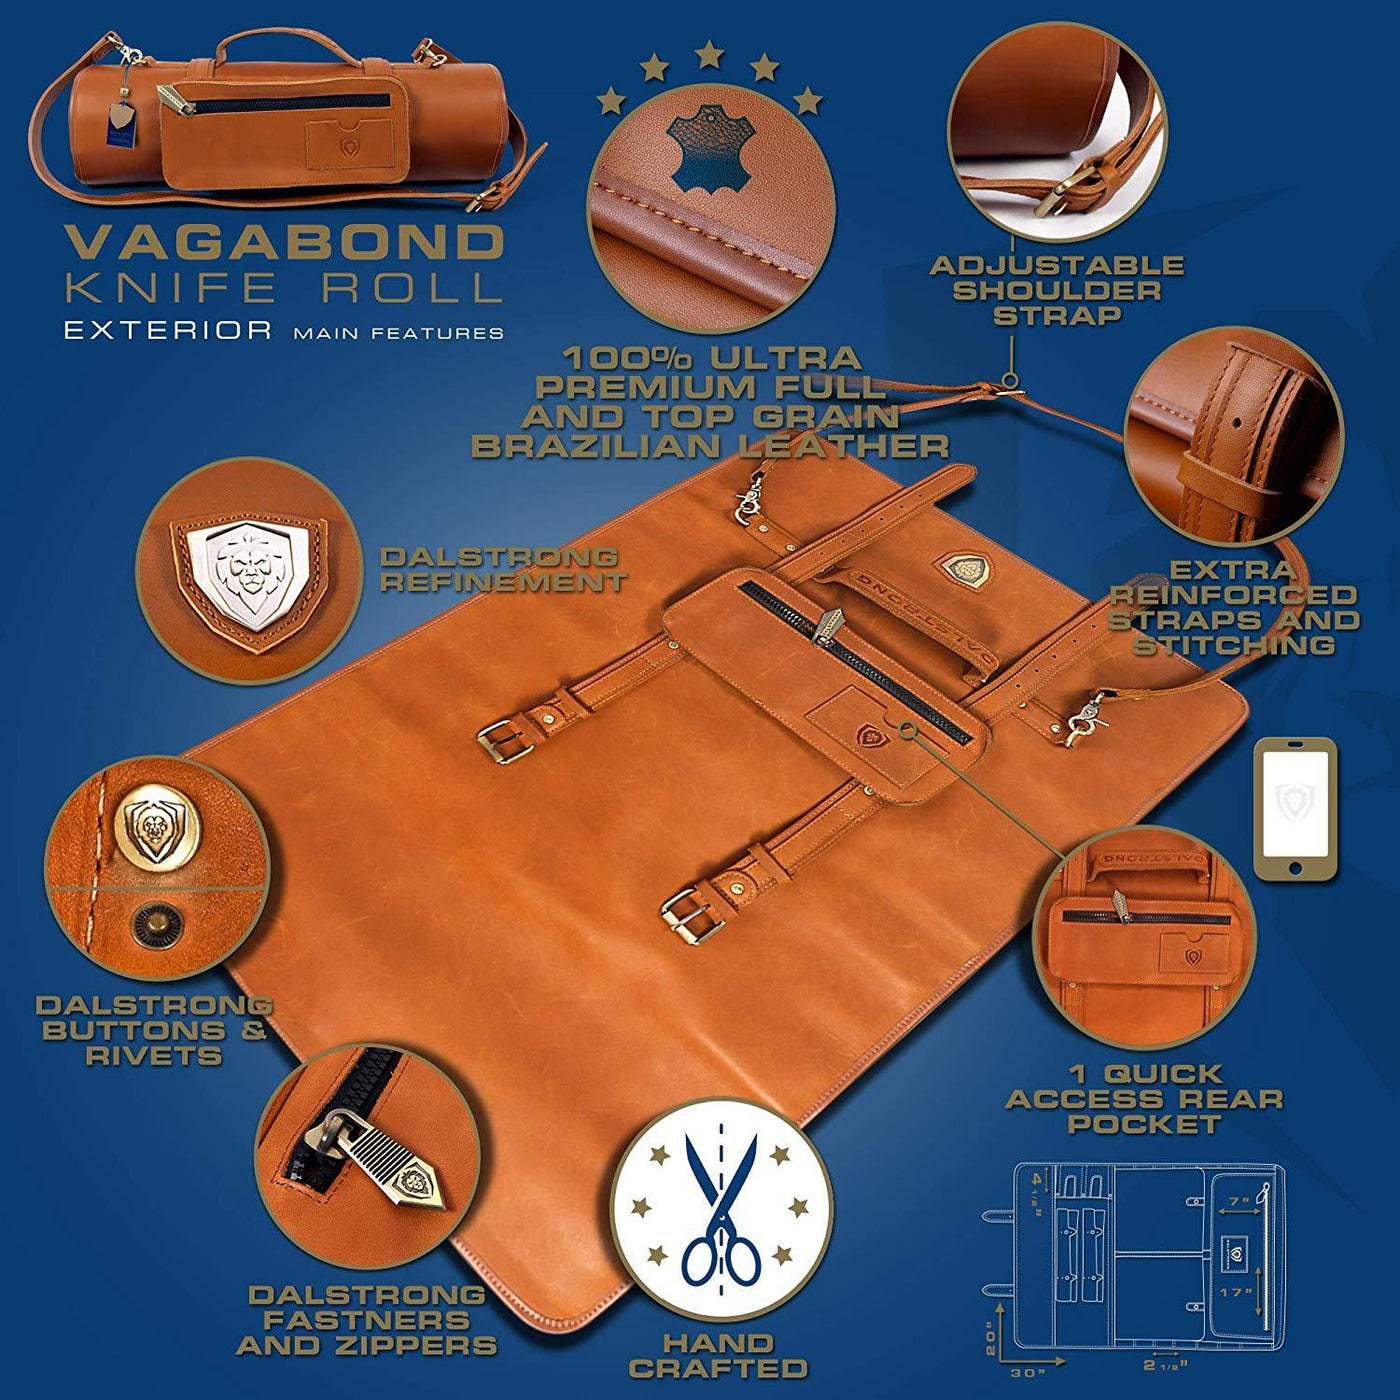 California Brown | Full Grain Leather | Vagabond Knife Roll | Dalstrong ©